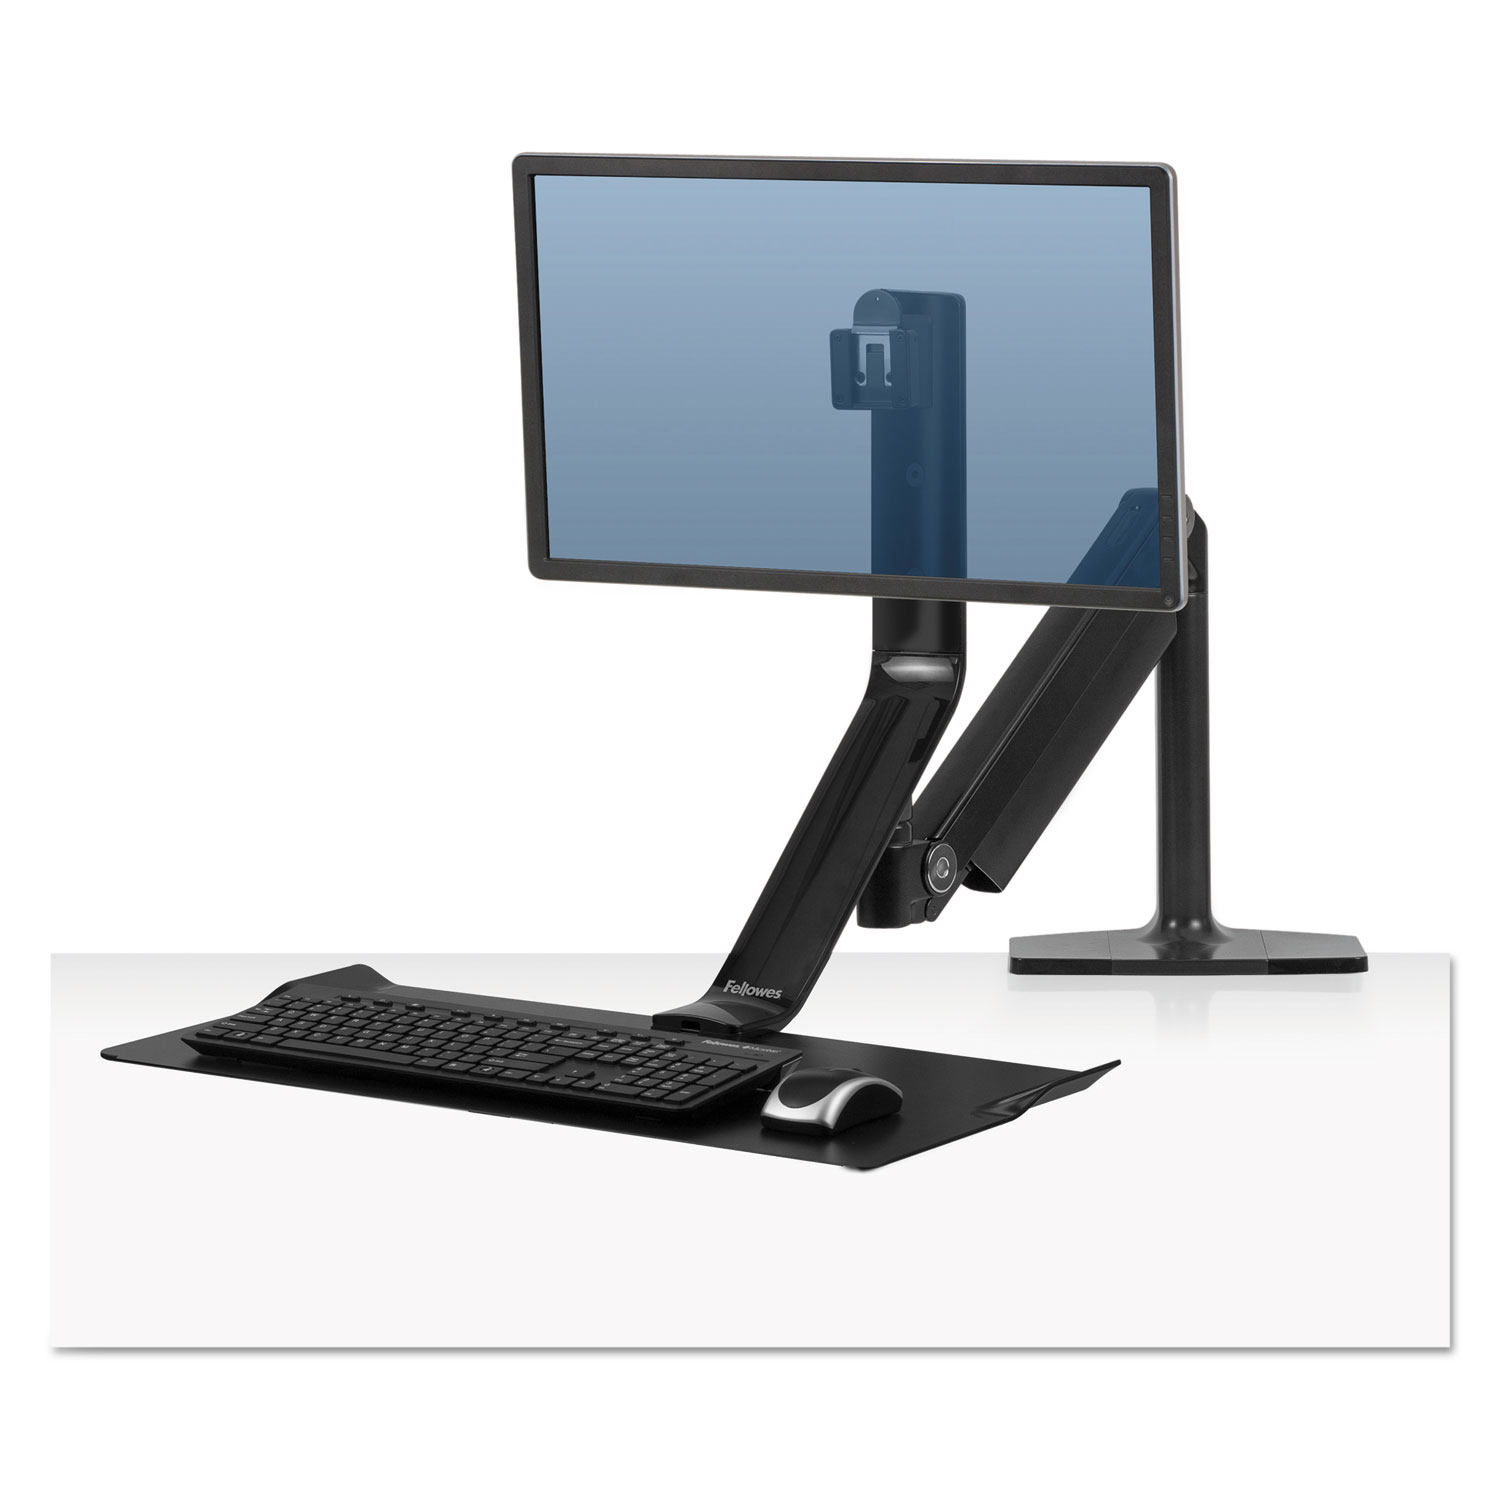 Extend Sit-Stand Workstation with Humanscale Technology, Single Monitor, Black